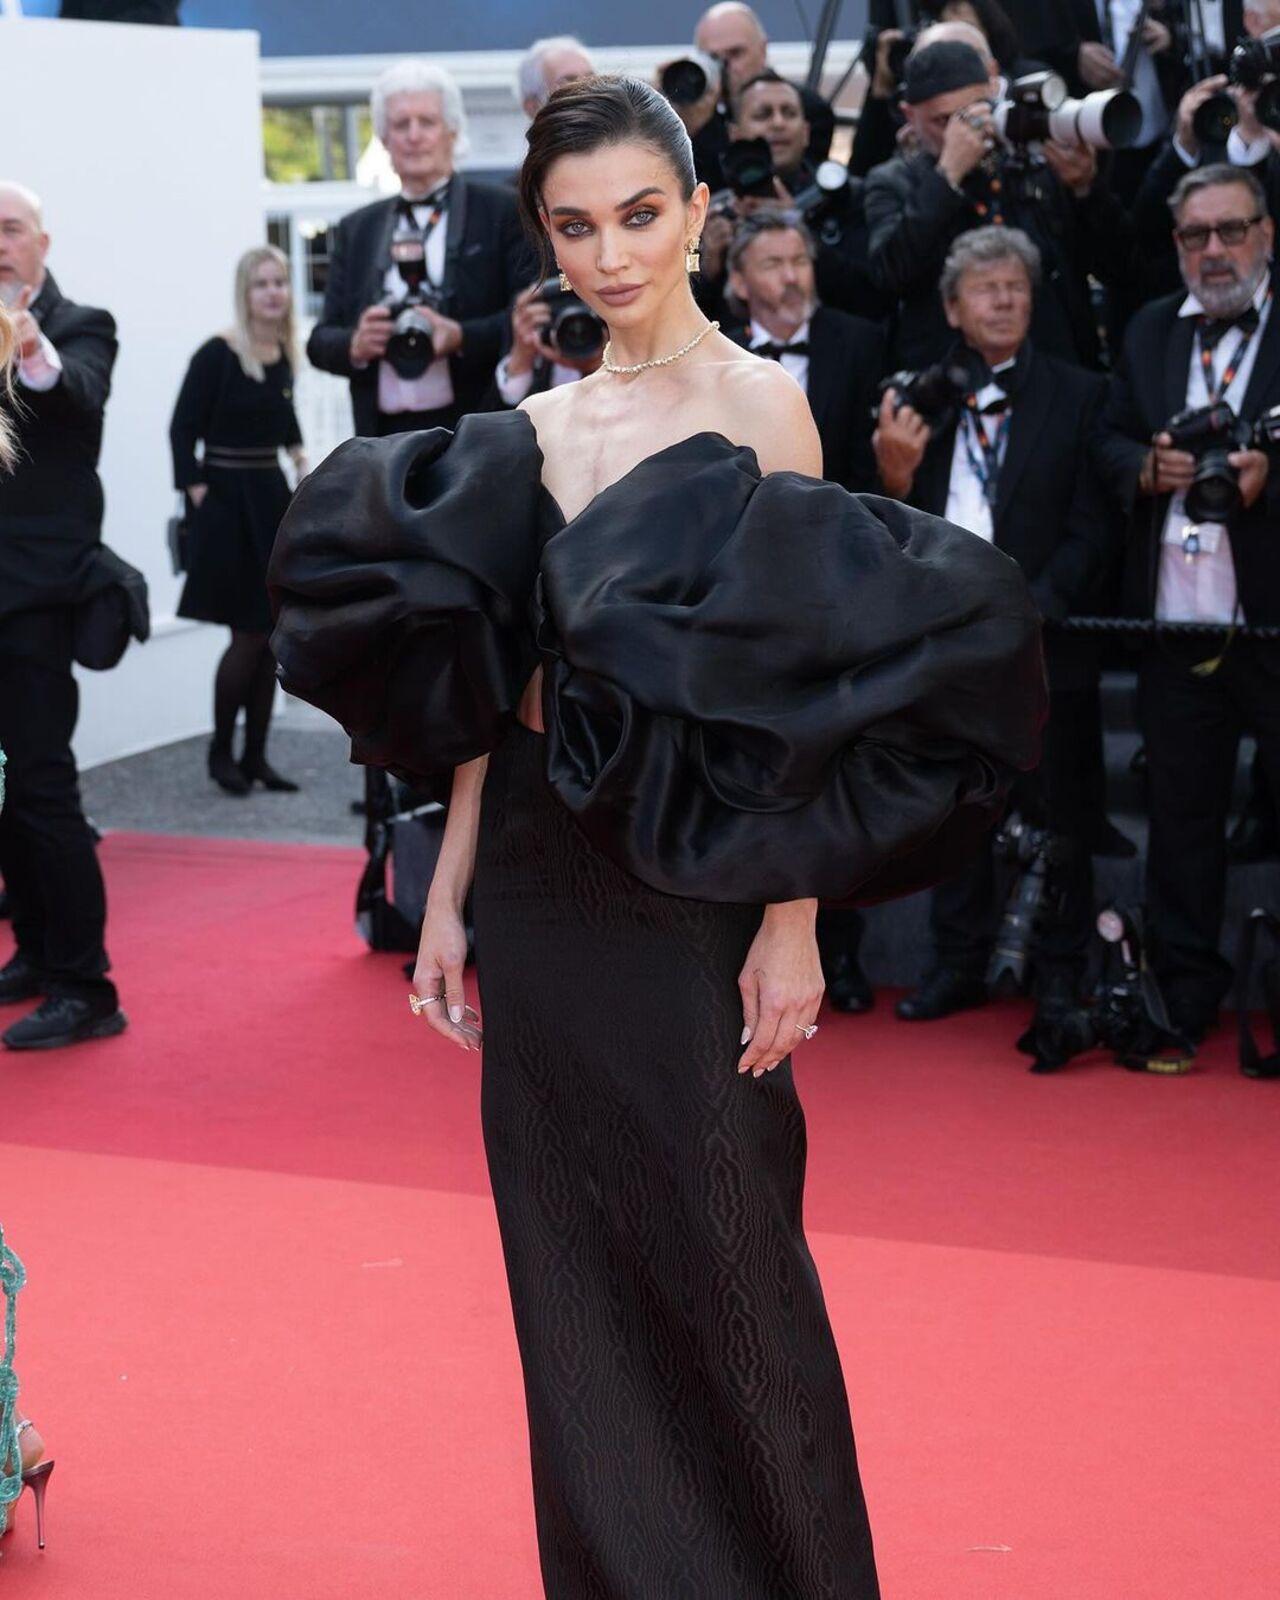 Amy Jackson walked the red carpet for the premiere of the film 'Horizon-An American Saga' at Cannes Film Festival